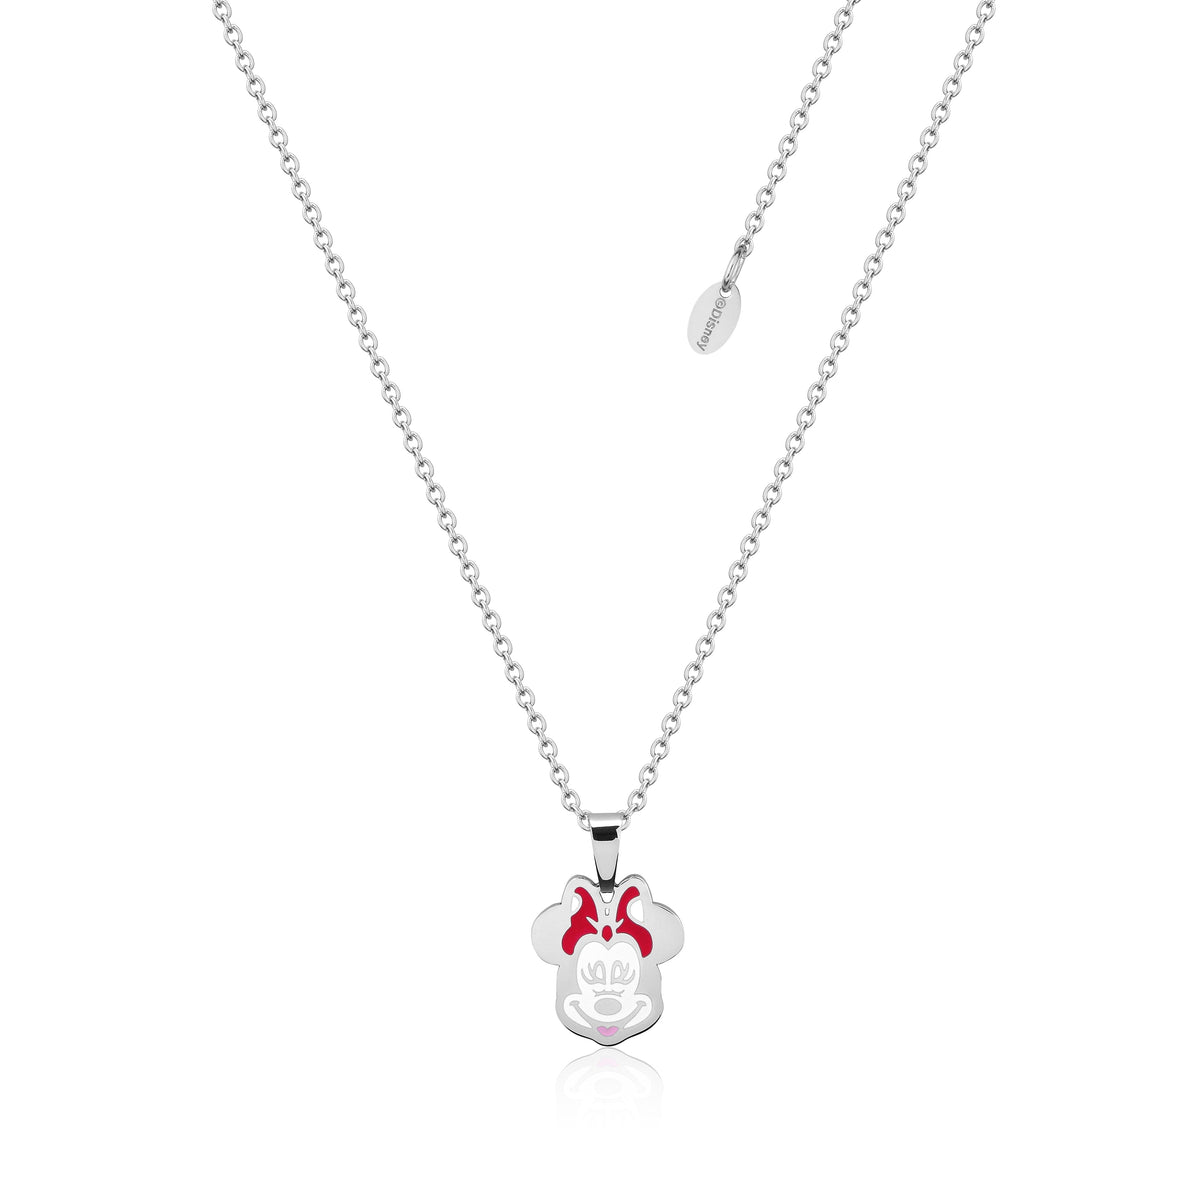 Disney Necklace Minnie Mouse, 925 Sterling Silver